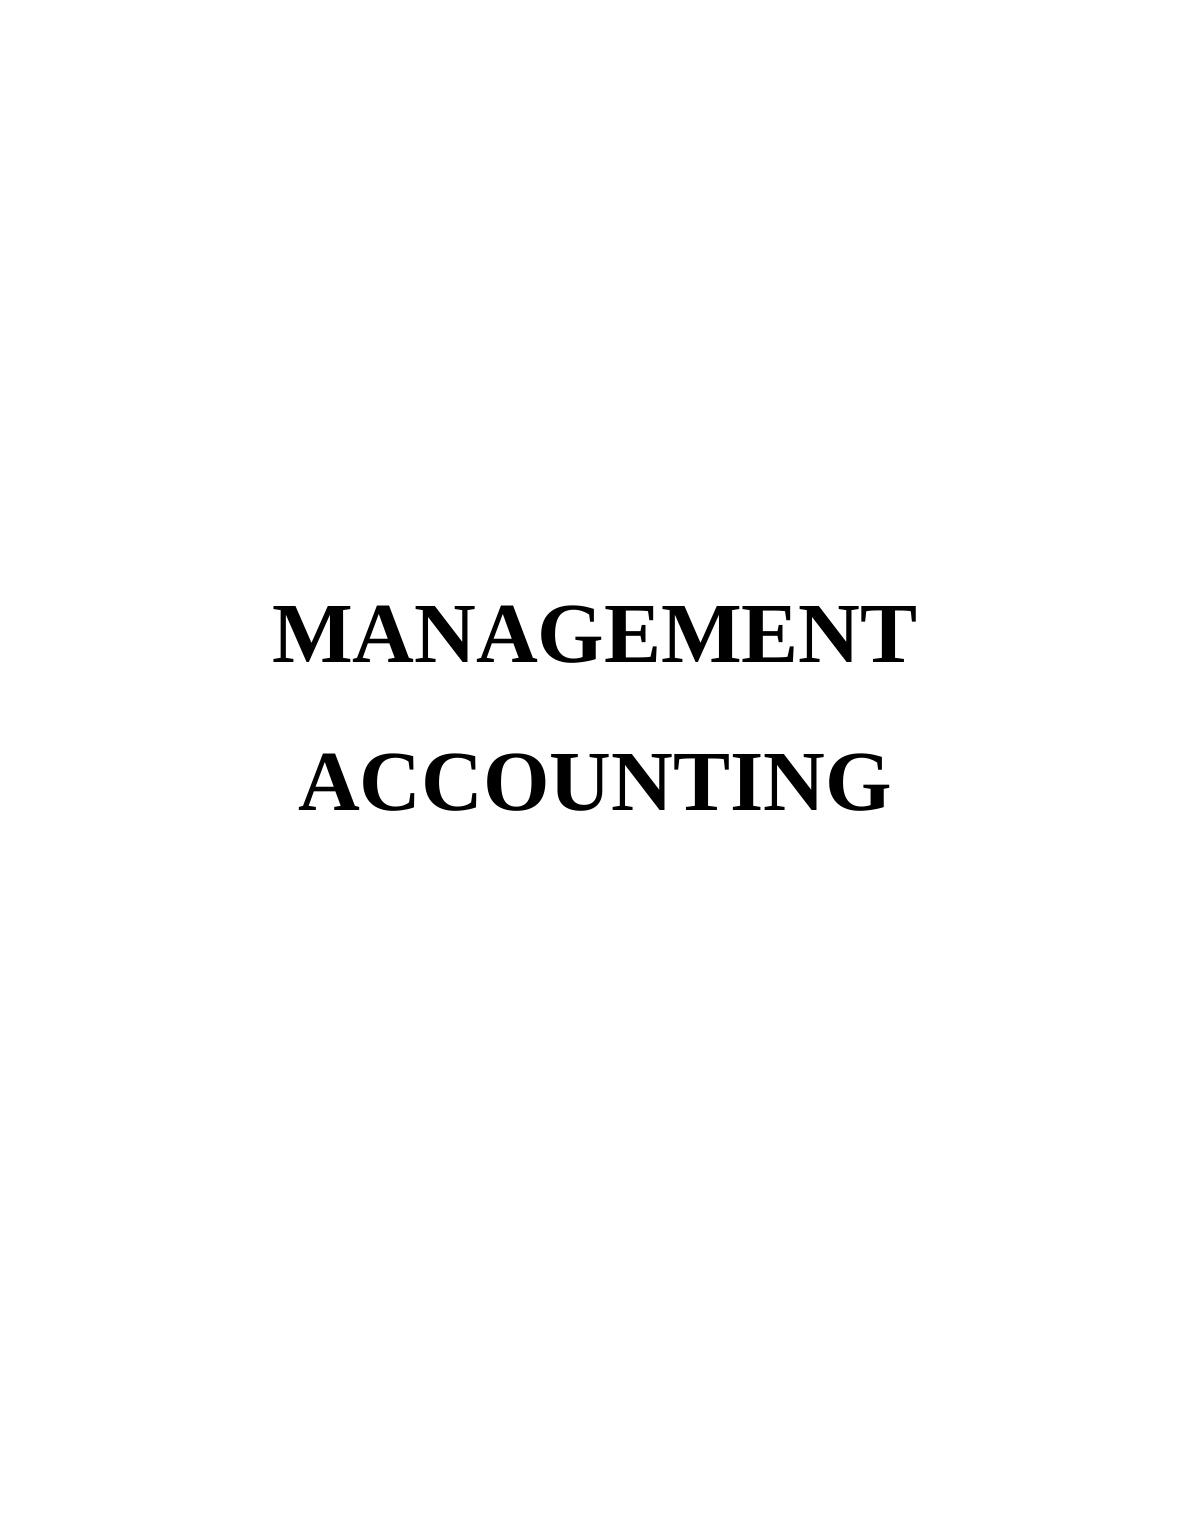 (Doc) Management Accounting Assignment - Solution_1